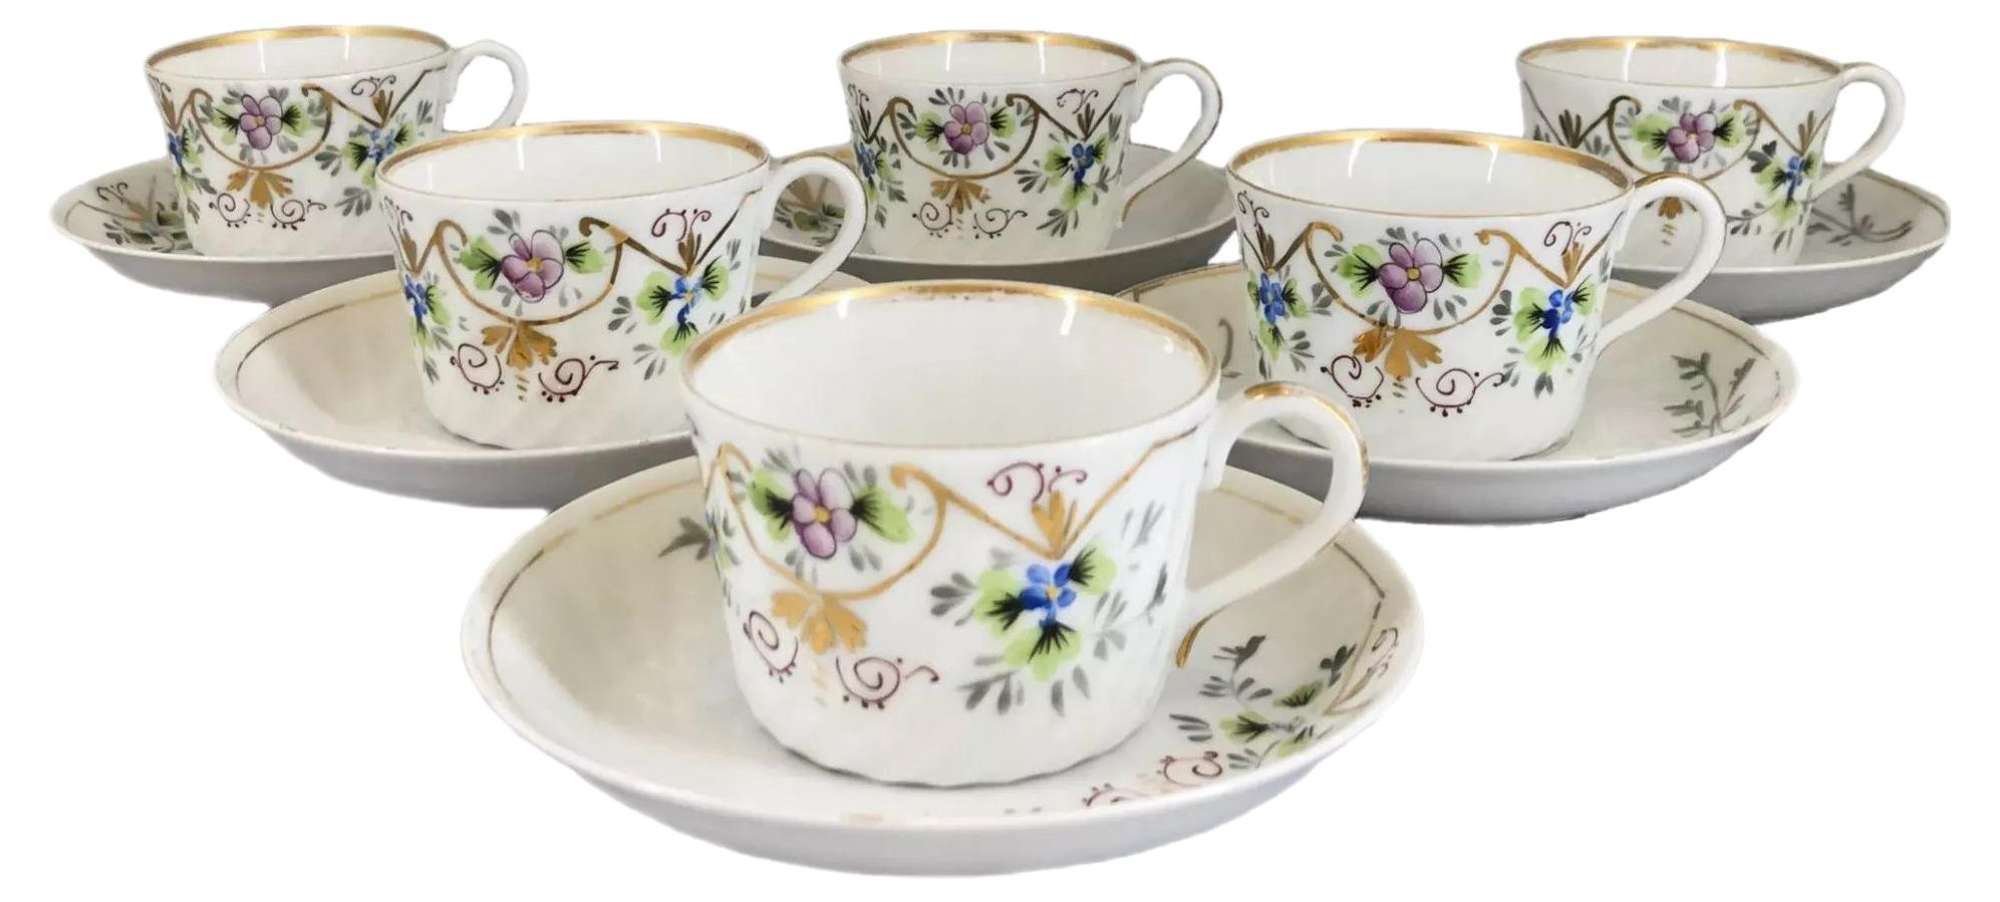 Six Cups and Saucers from Kuznetsov